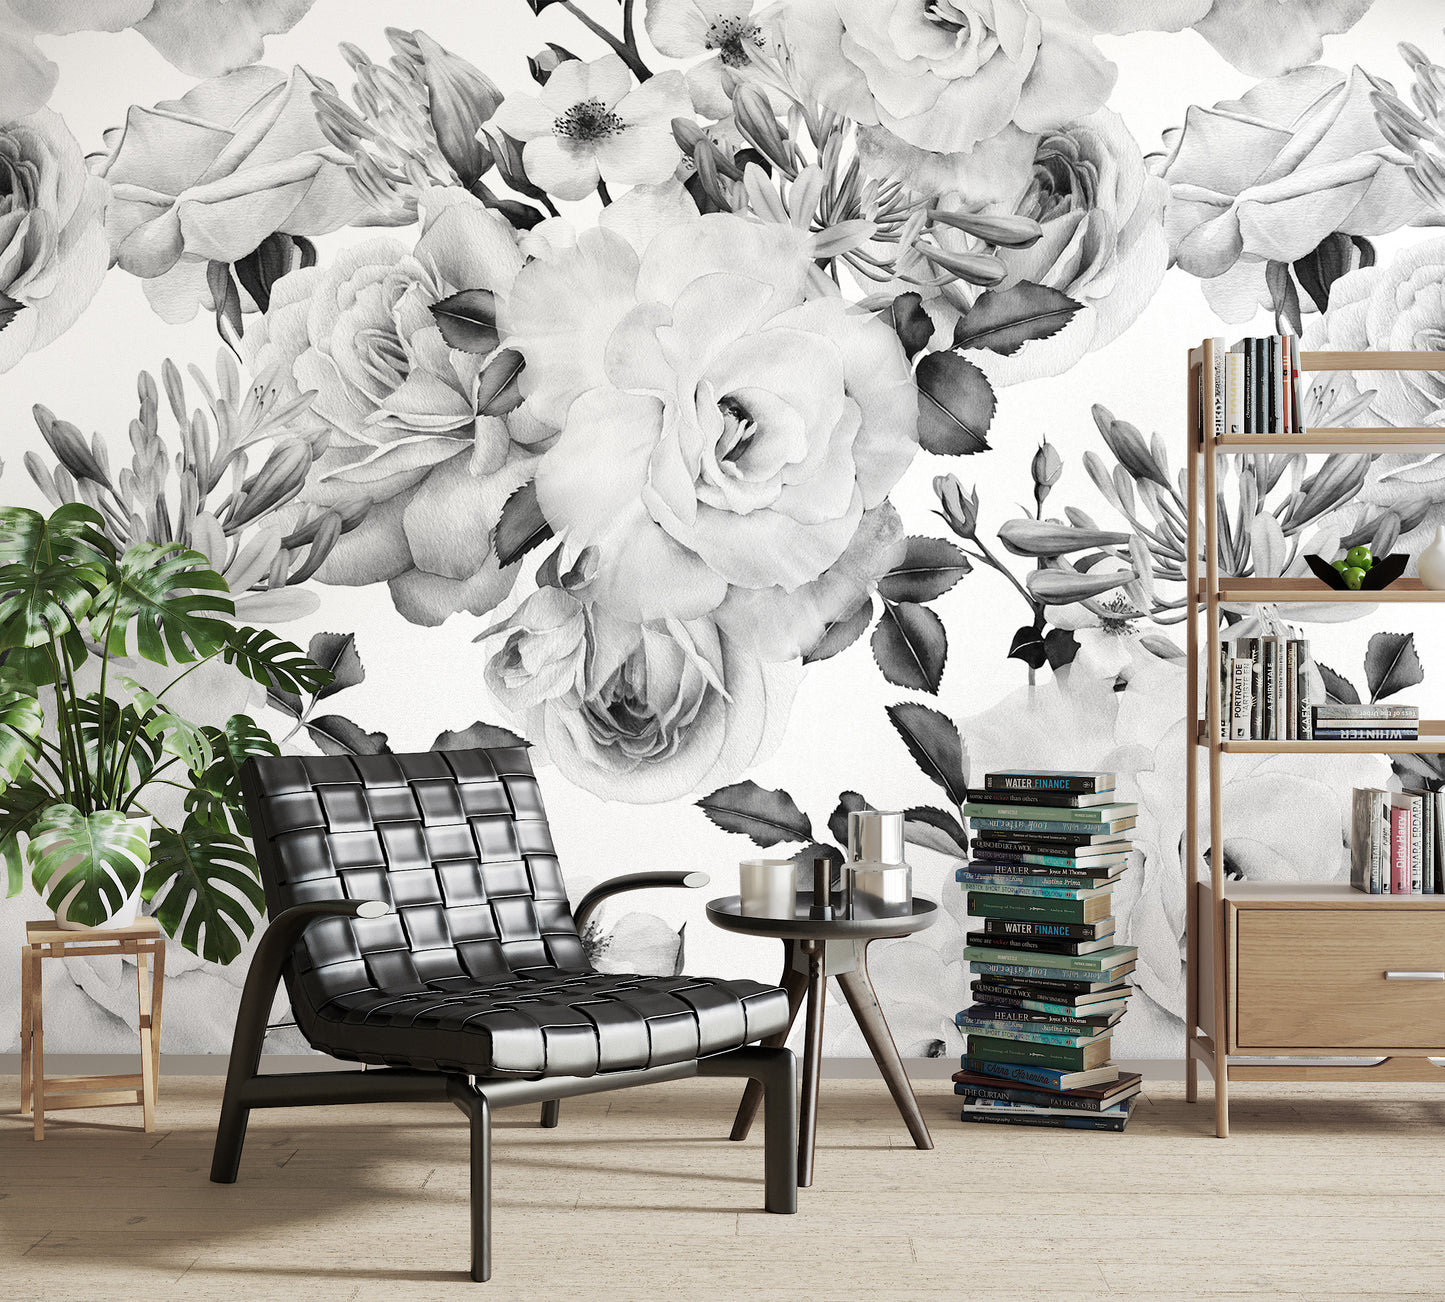 Large Rose Wallpaper Black and White Floral Wallpaper Peel and Stick Big Flower Wallpaper, Removable Wallpaper Mural